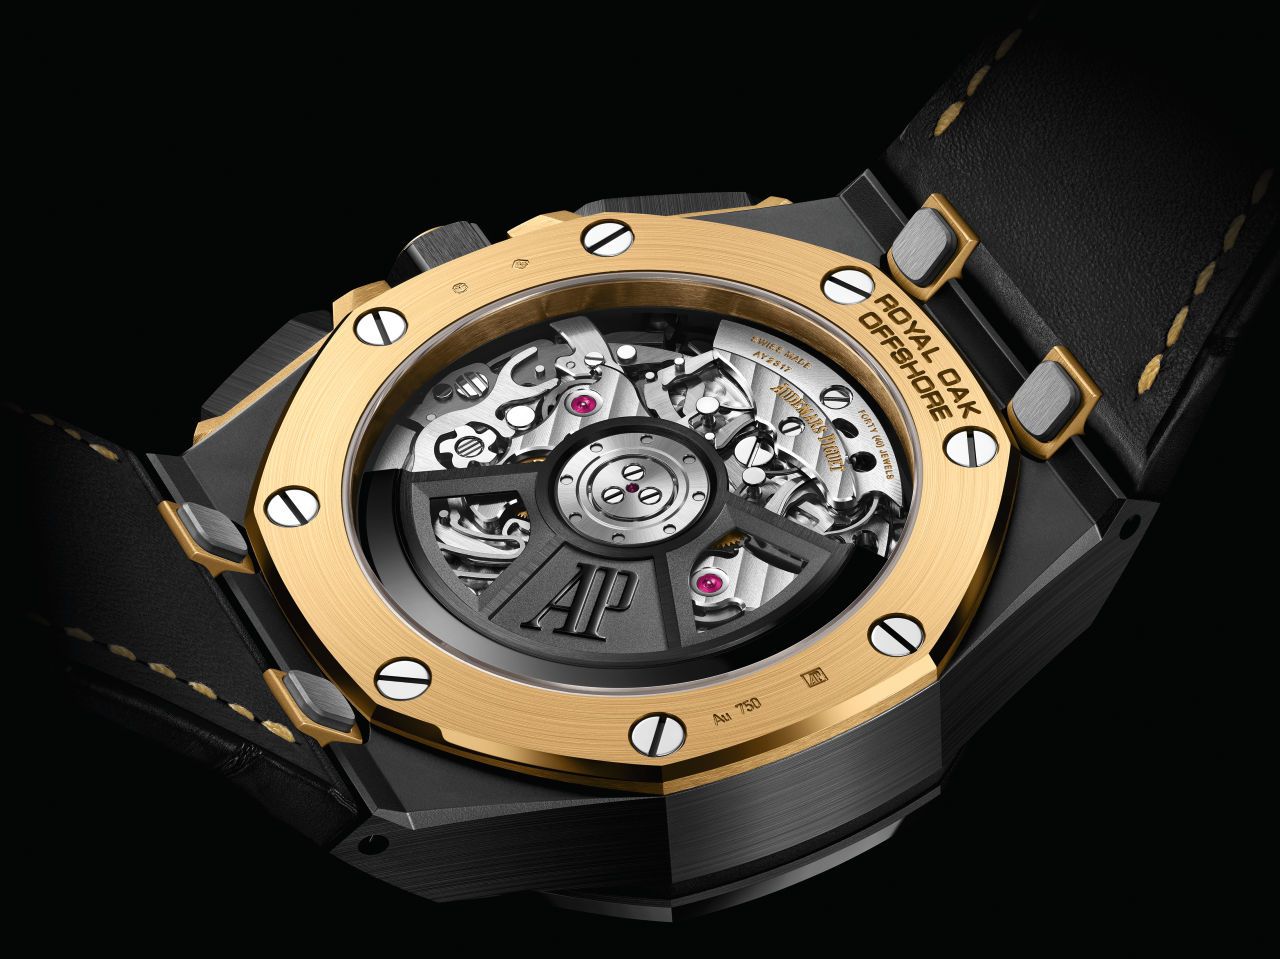 Royal Oak Offshore Selfwinding Chronograph in Black Ceramic and Yellow Gold 